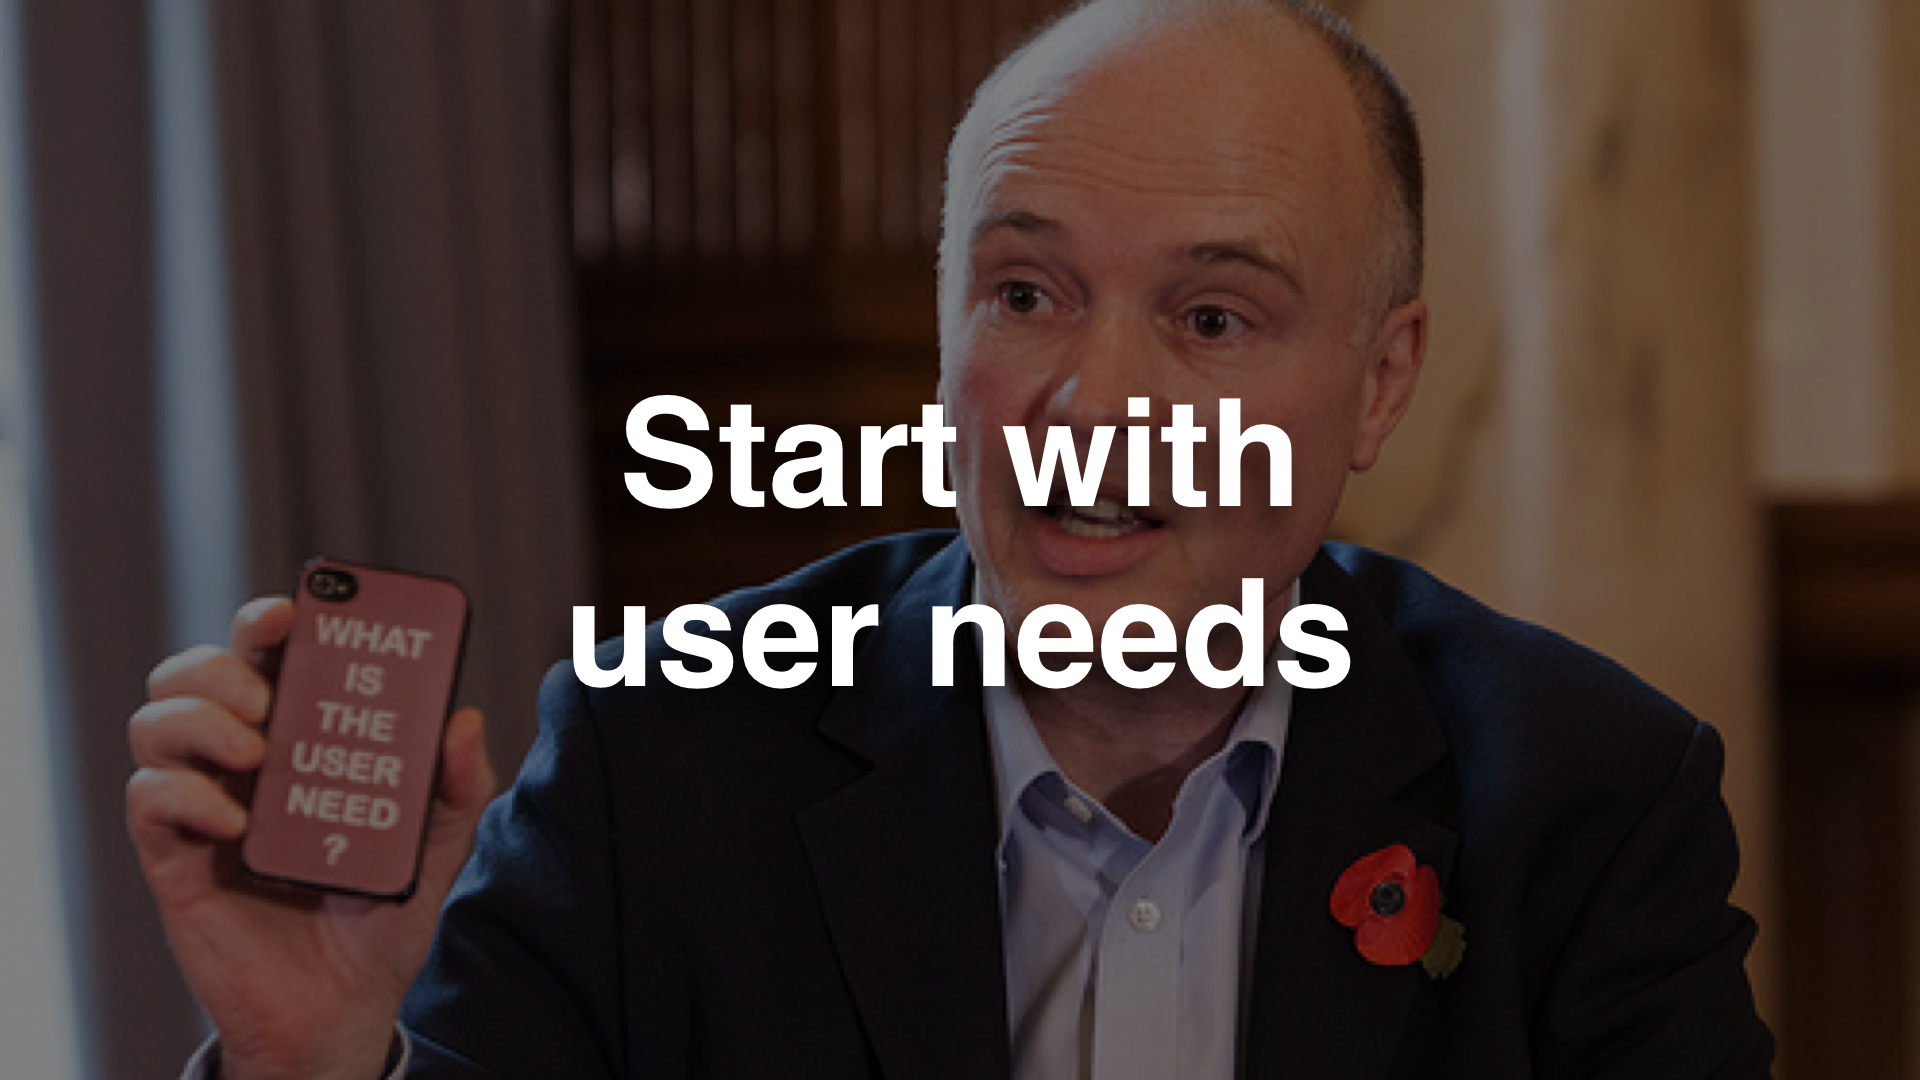 "Start with user needs" - photo of Liam Maxwell holding a mobile phone that says "what is the user need?"